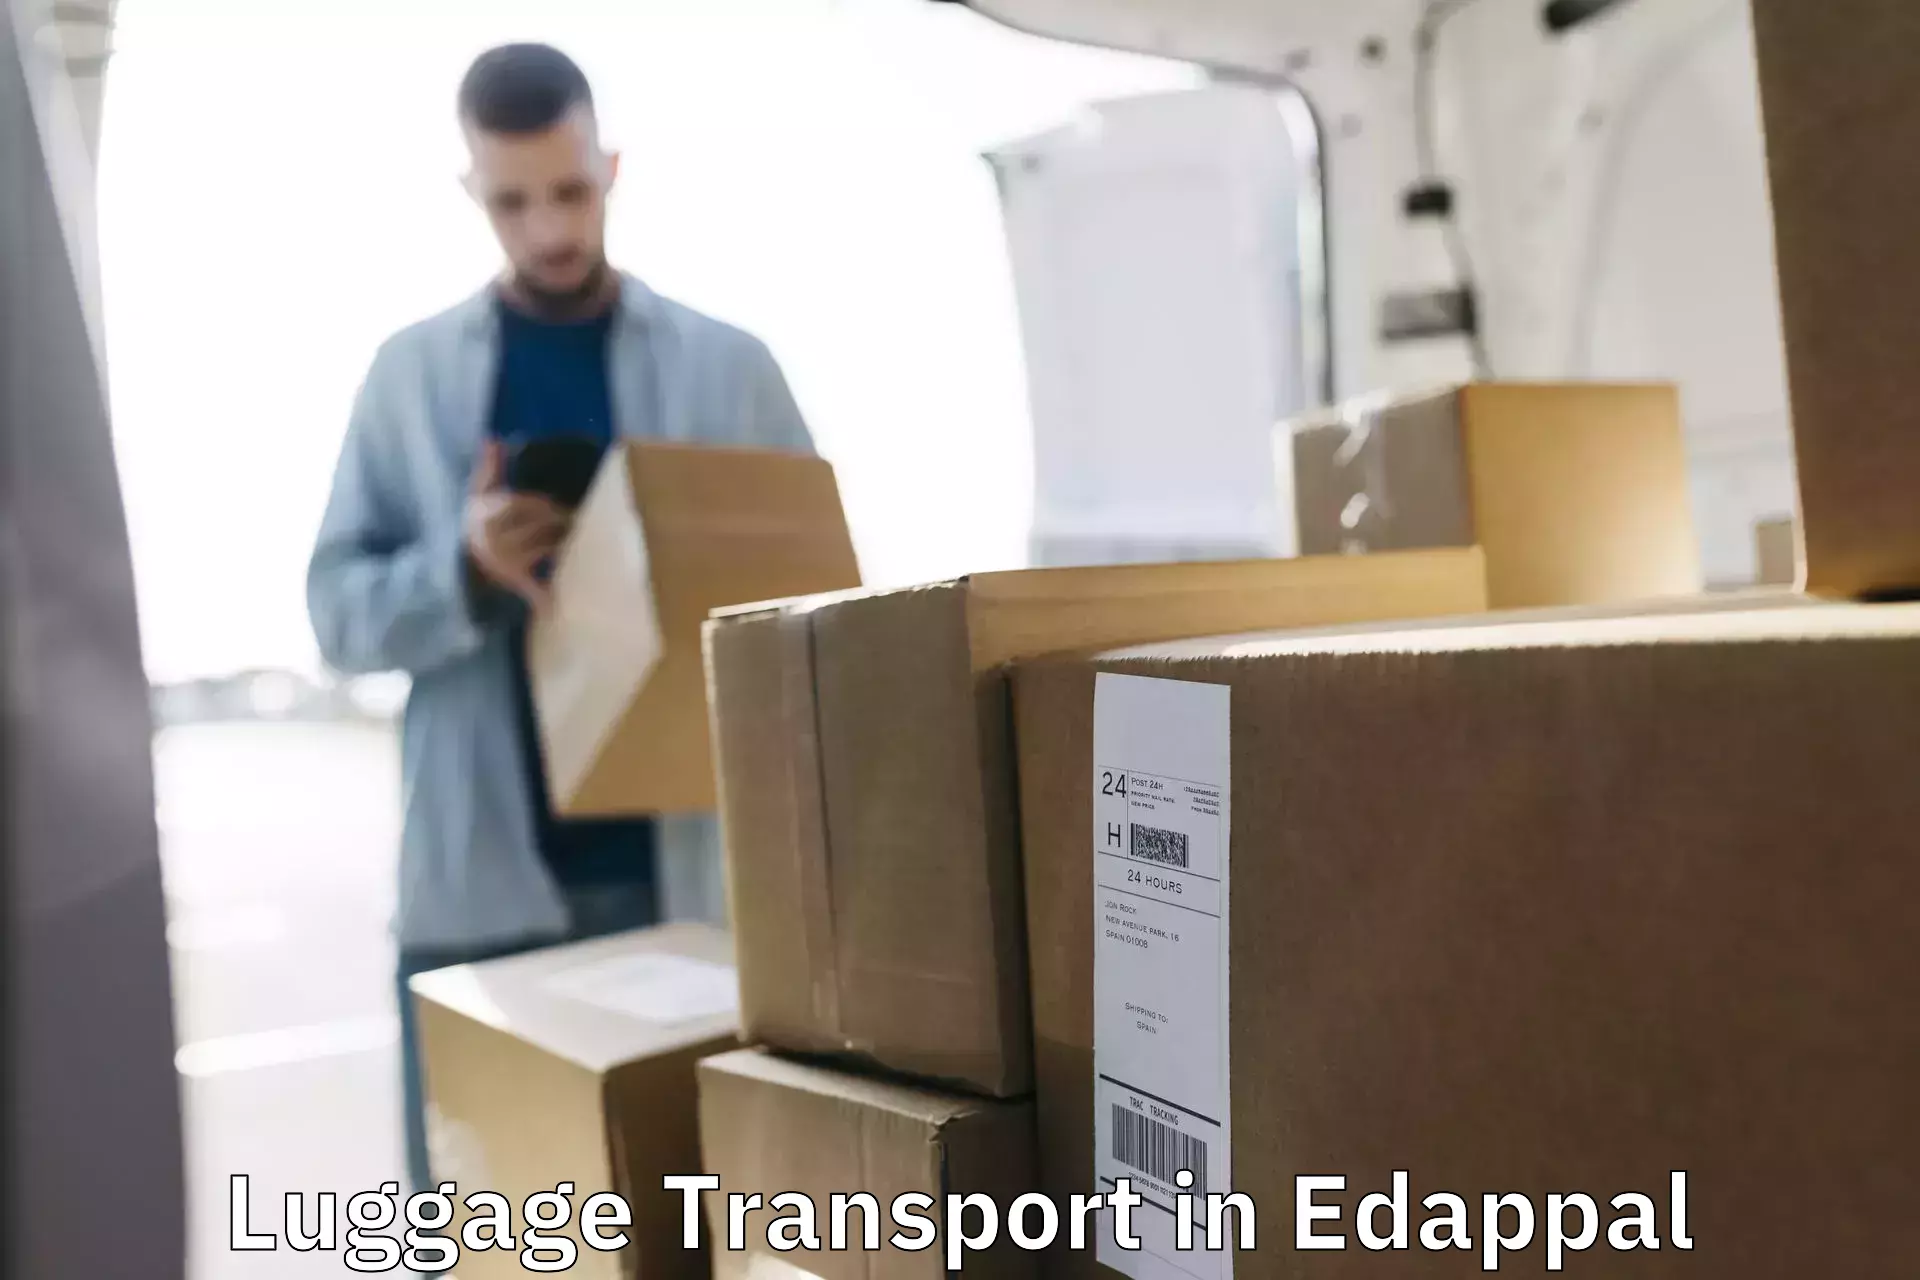 Excess baggage transport in Edappal